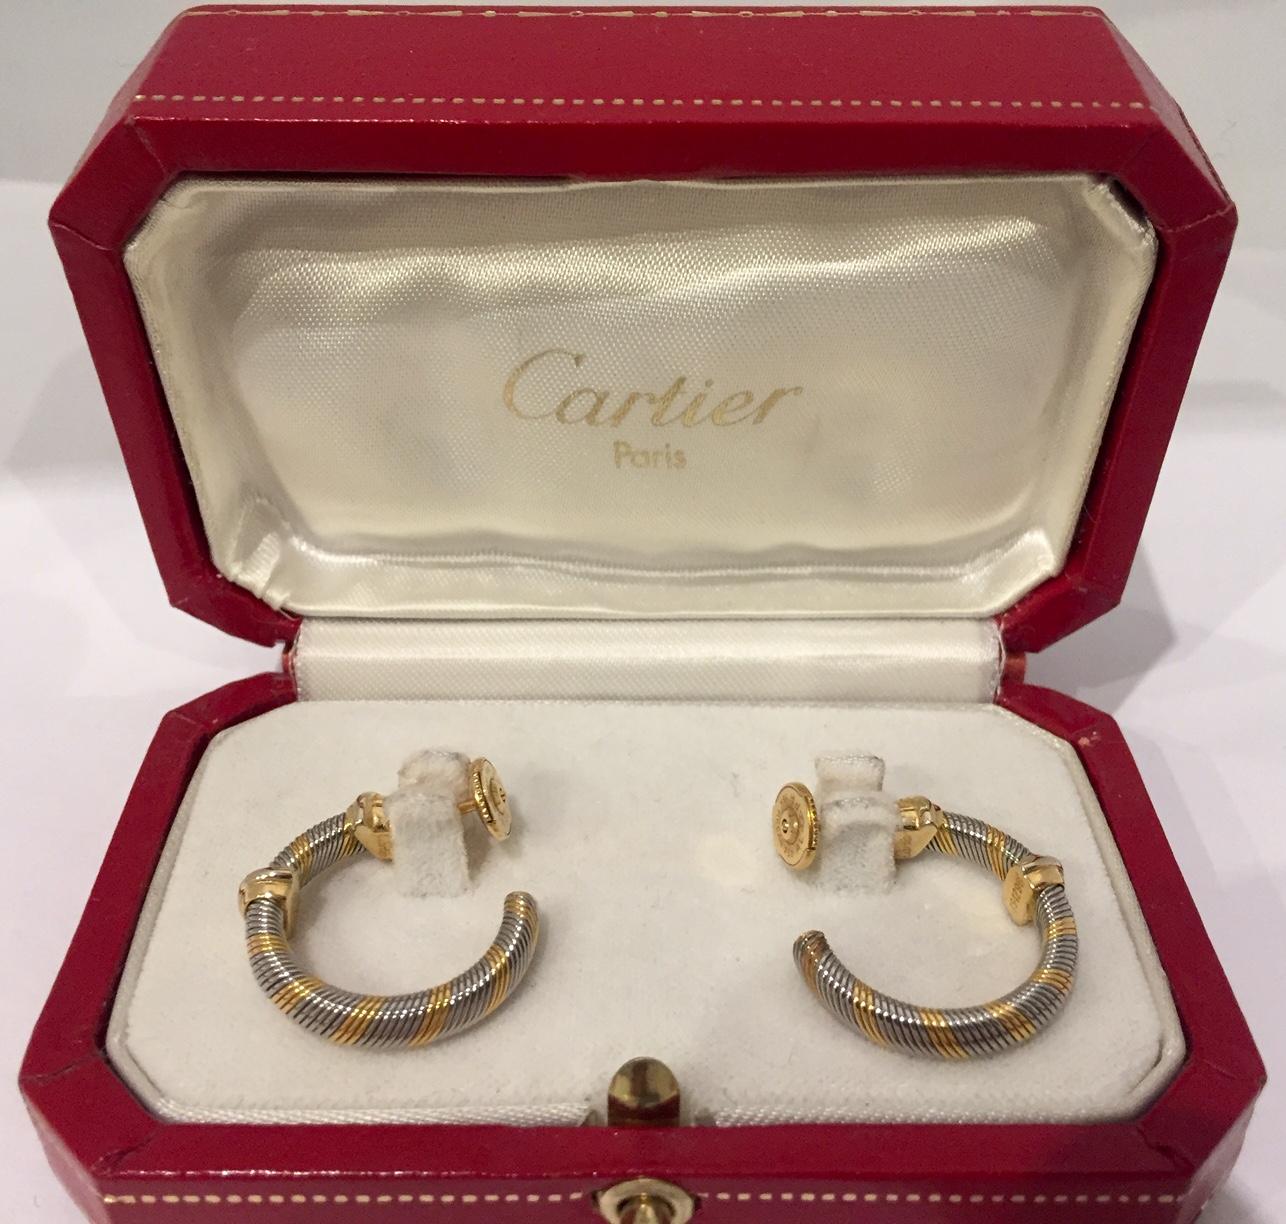 A beautiful pair of vintage 1986 Cartier Hoop Earrings in 18k yellow gold & steel.
In incredible condition, these earrings would make a very stylish addition to any collection
Stamped Cartier 754296 or 750.
Diameter 20mm; weight 10.3 grams.